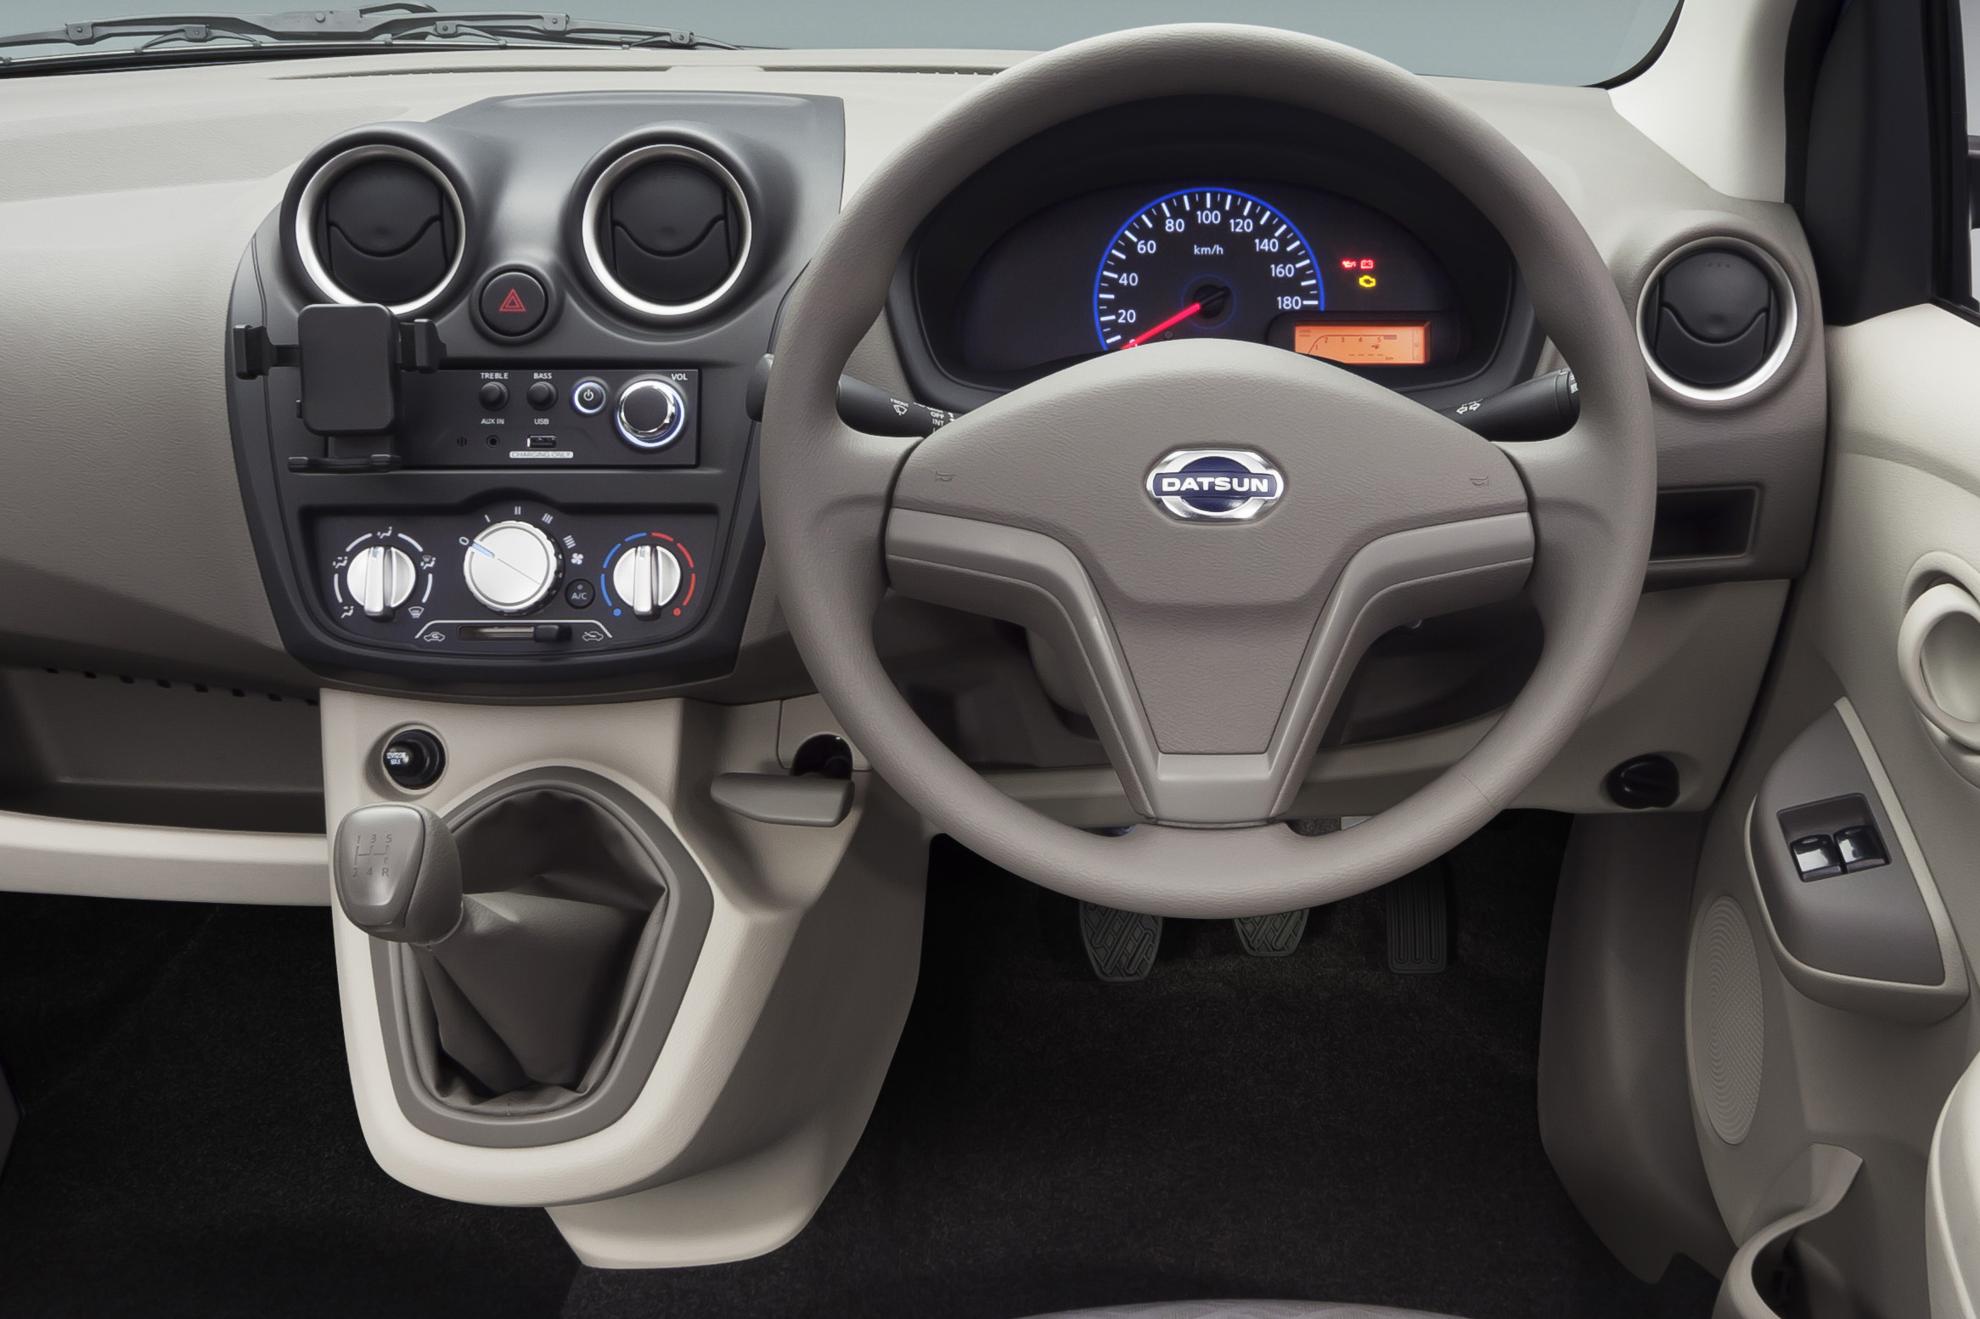 Datsun is Back with All-New Datsun GO for the New Risers